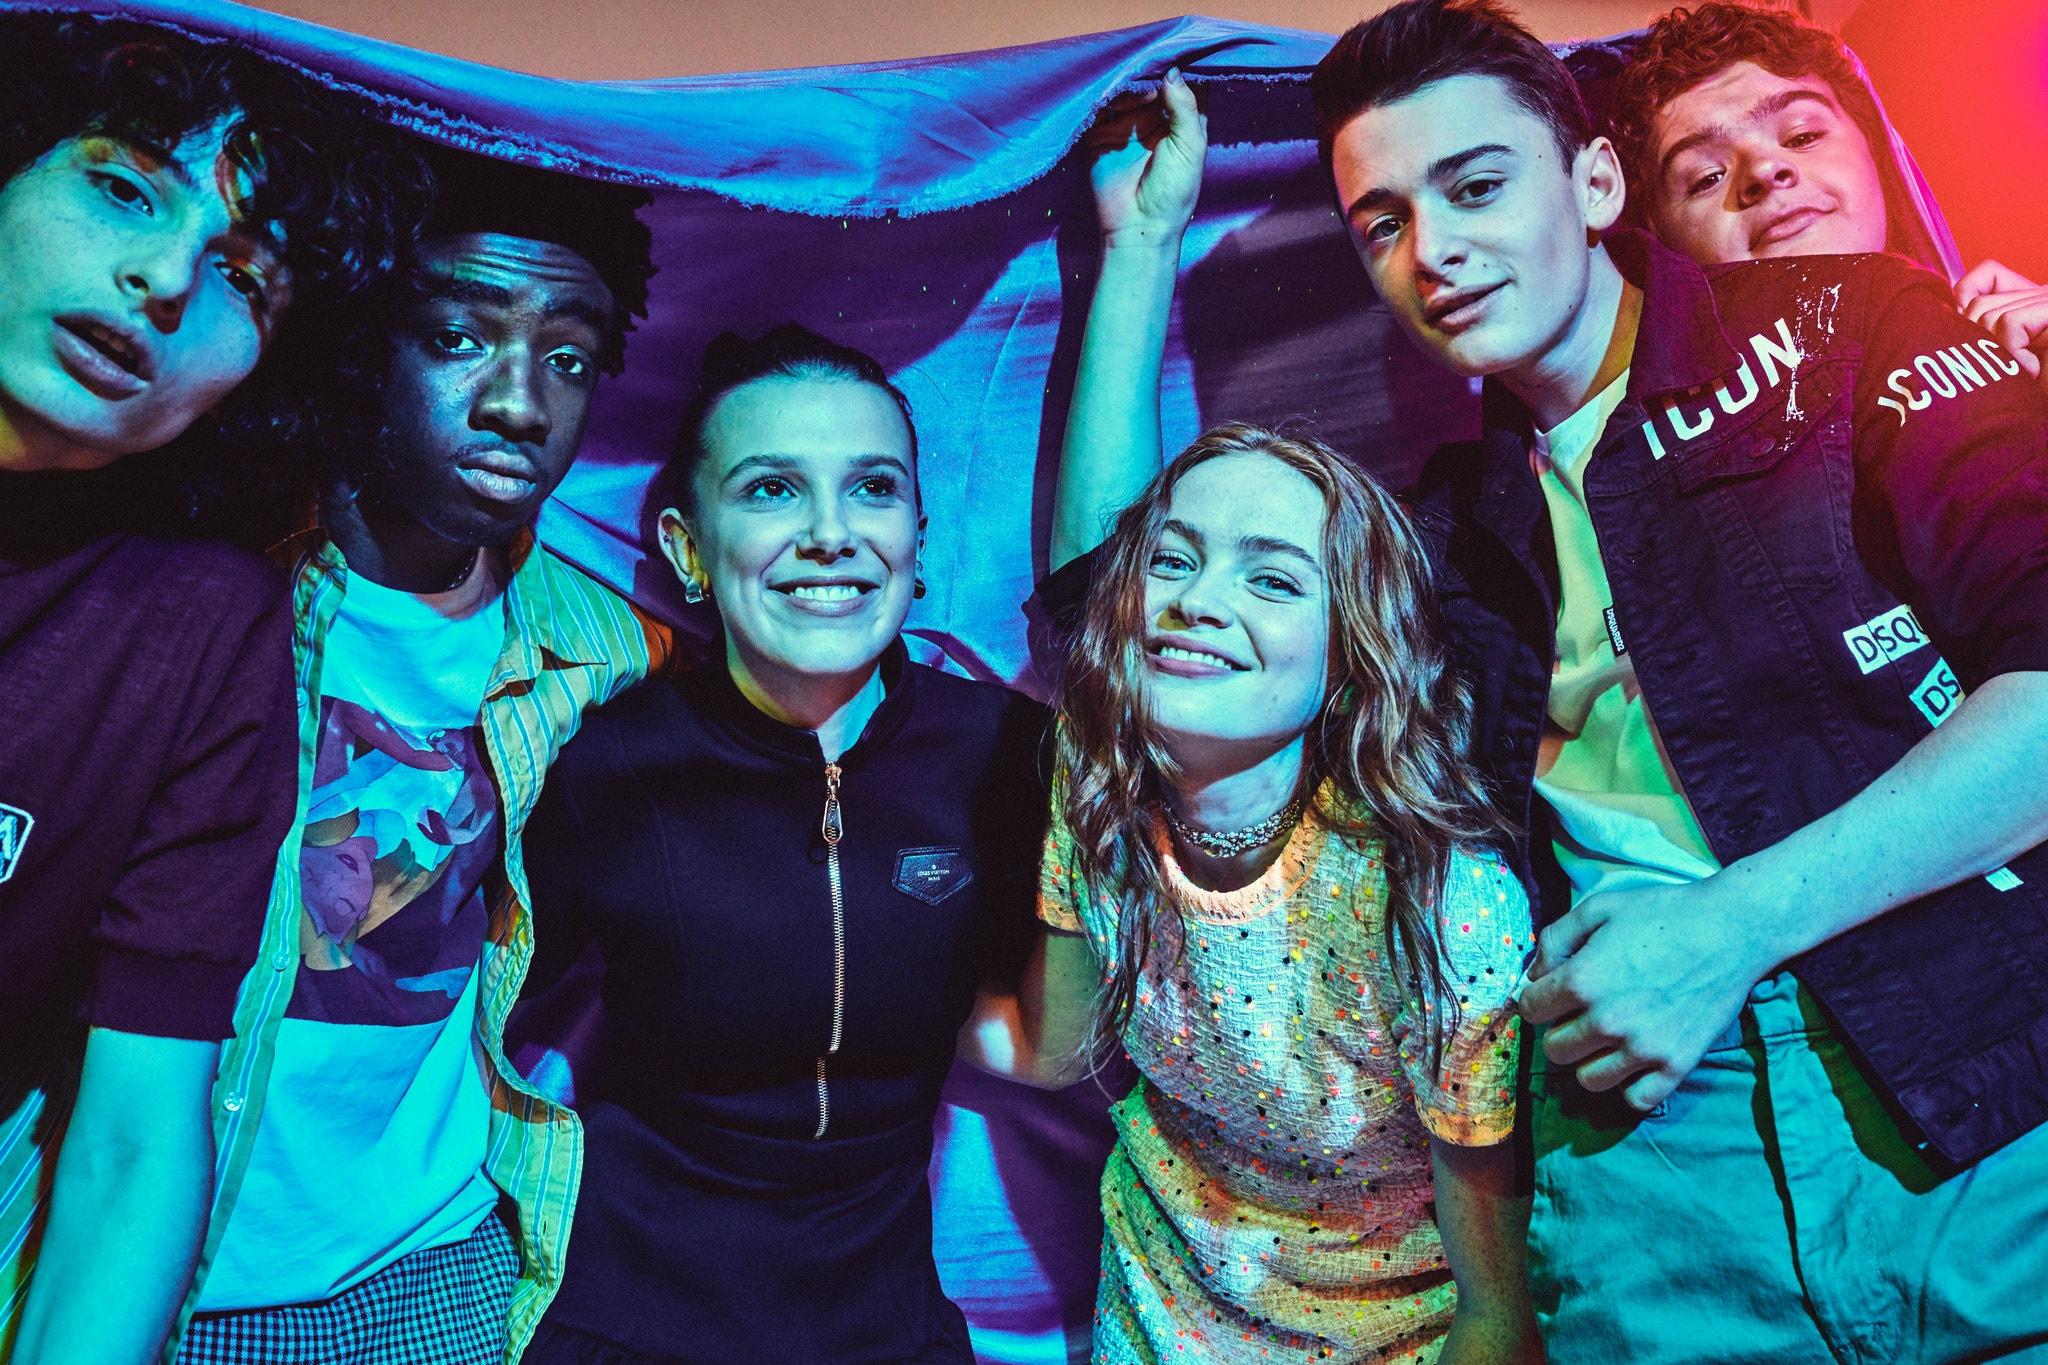 Sadie Sink and the Stranger Things cast.